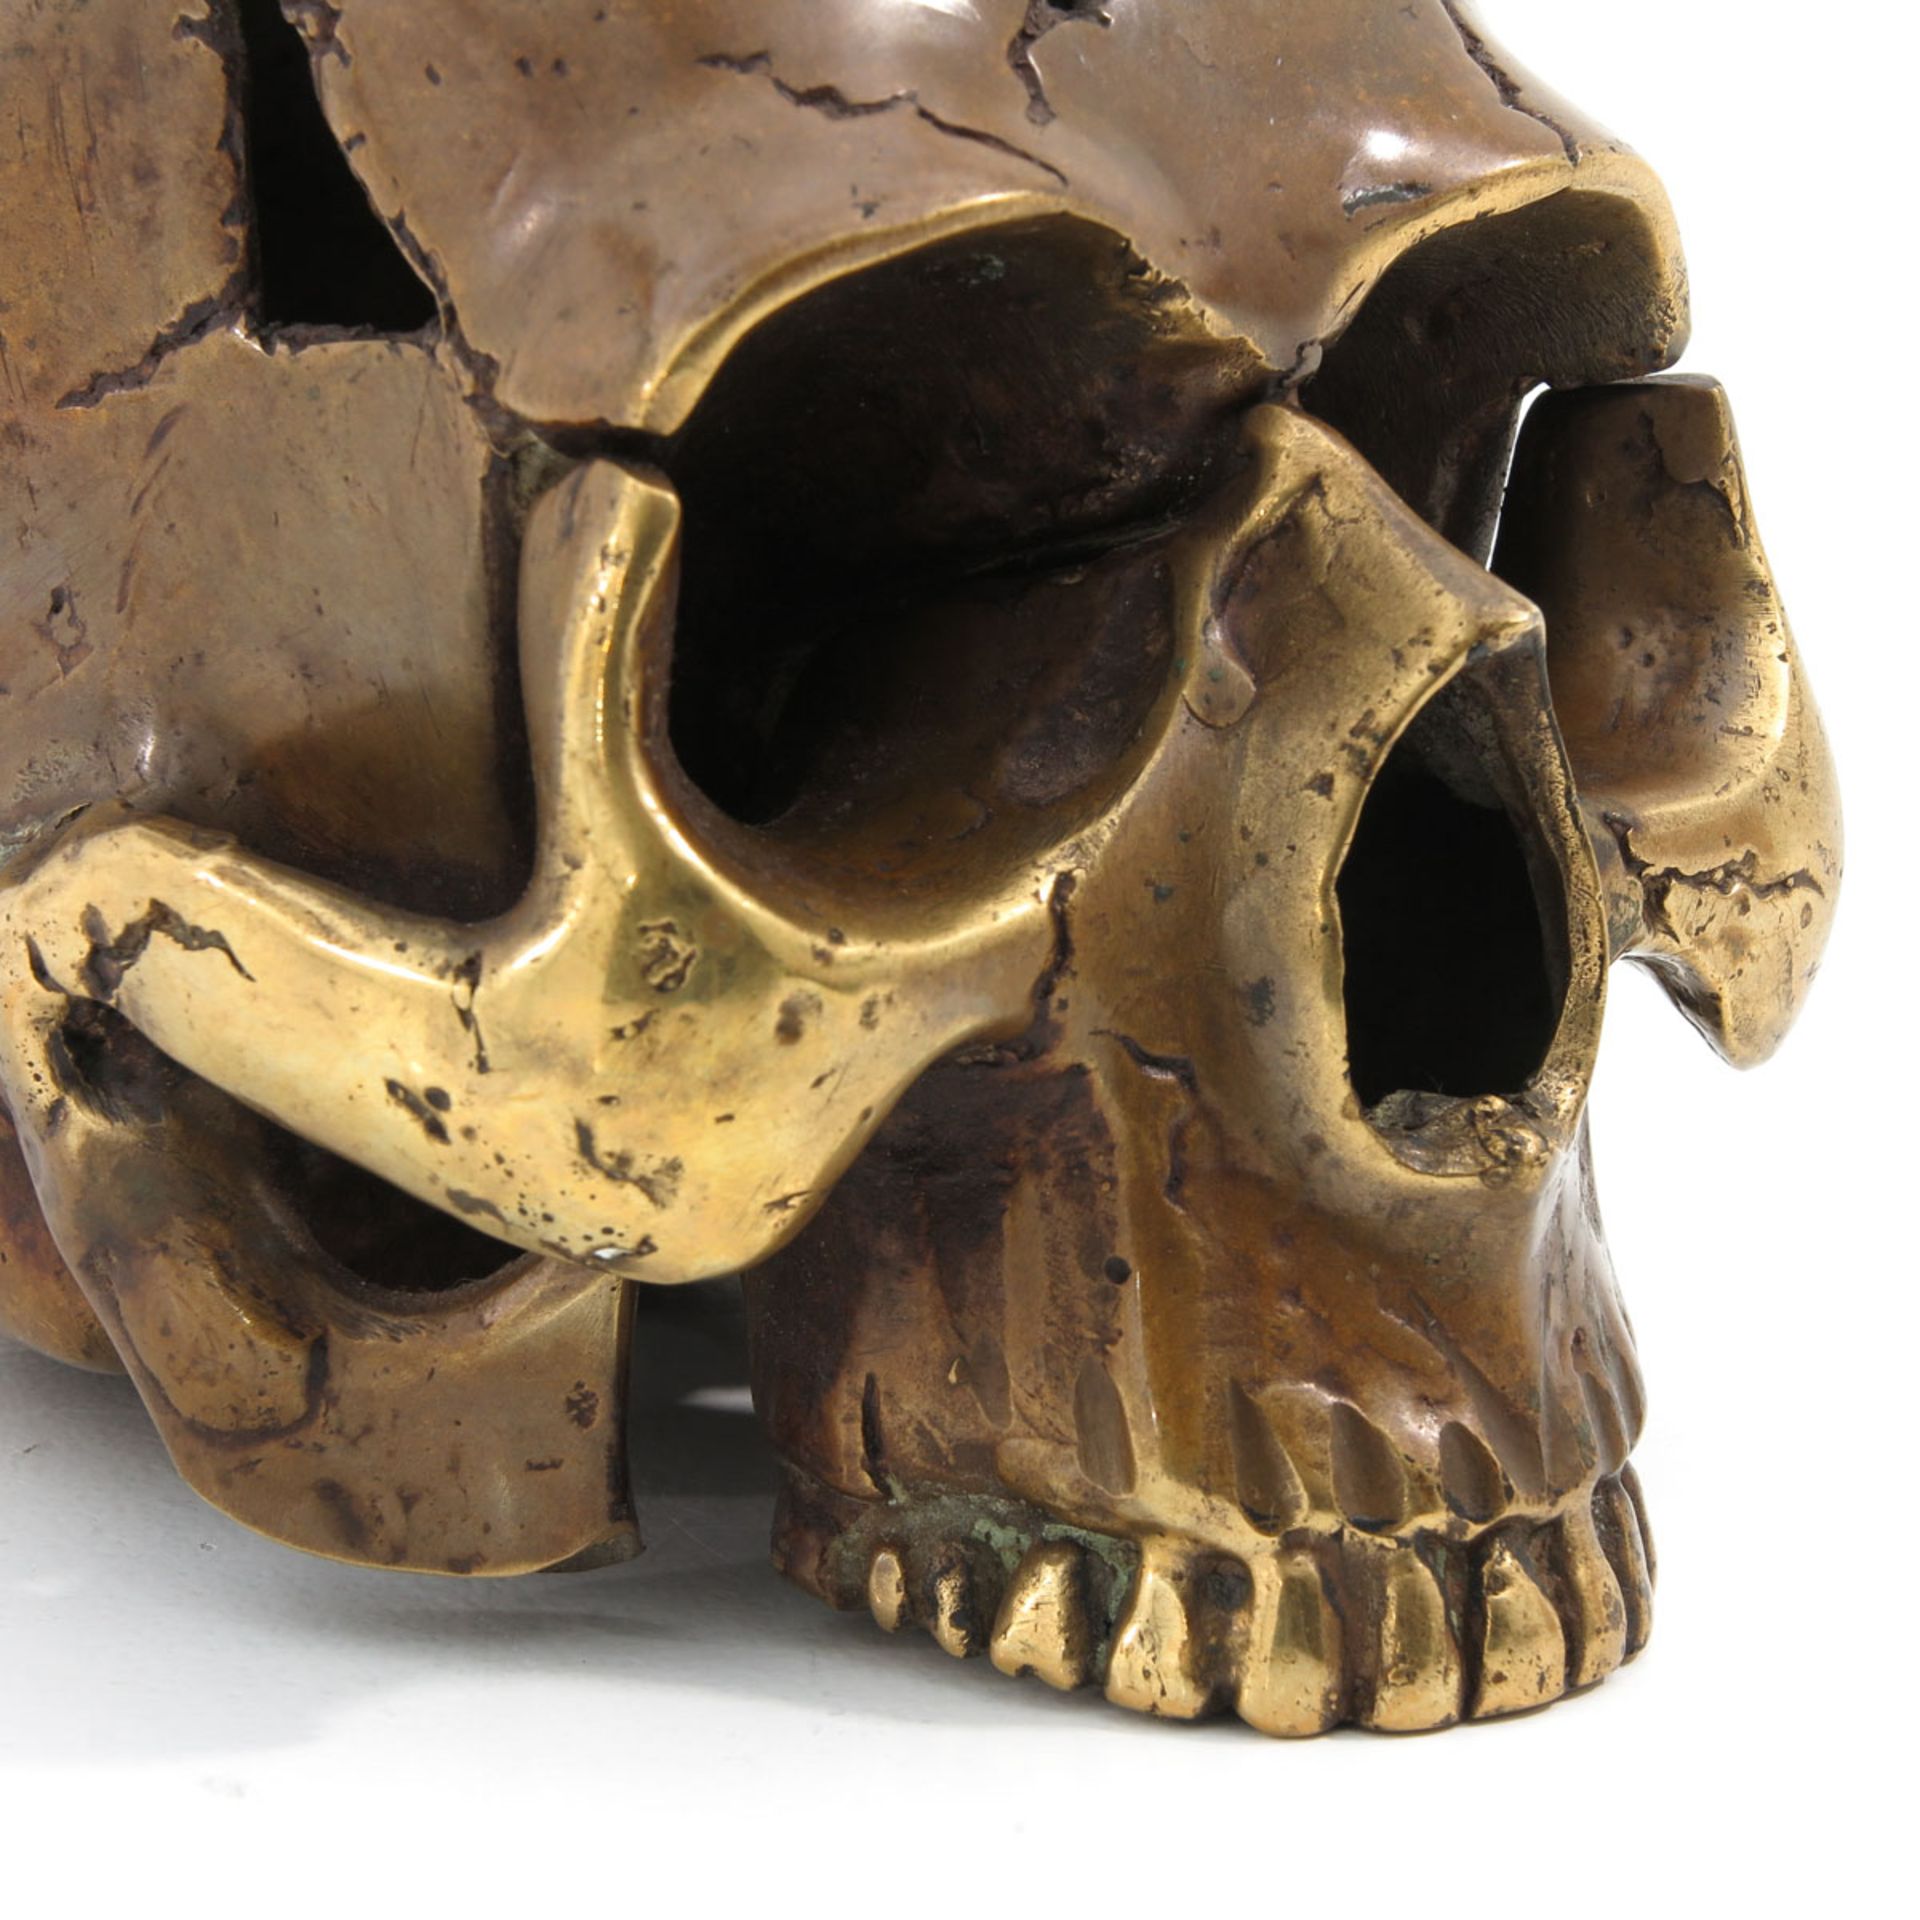 A 19th Century Bronze Sculpture of a Skull - Image 7 of 8